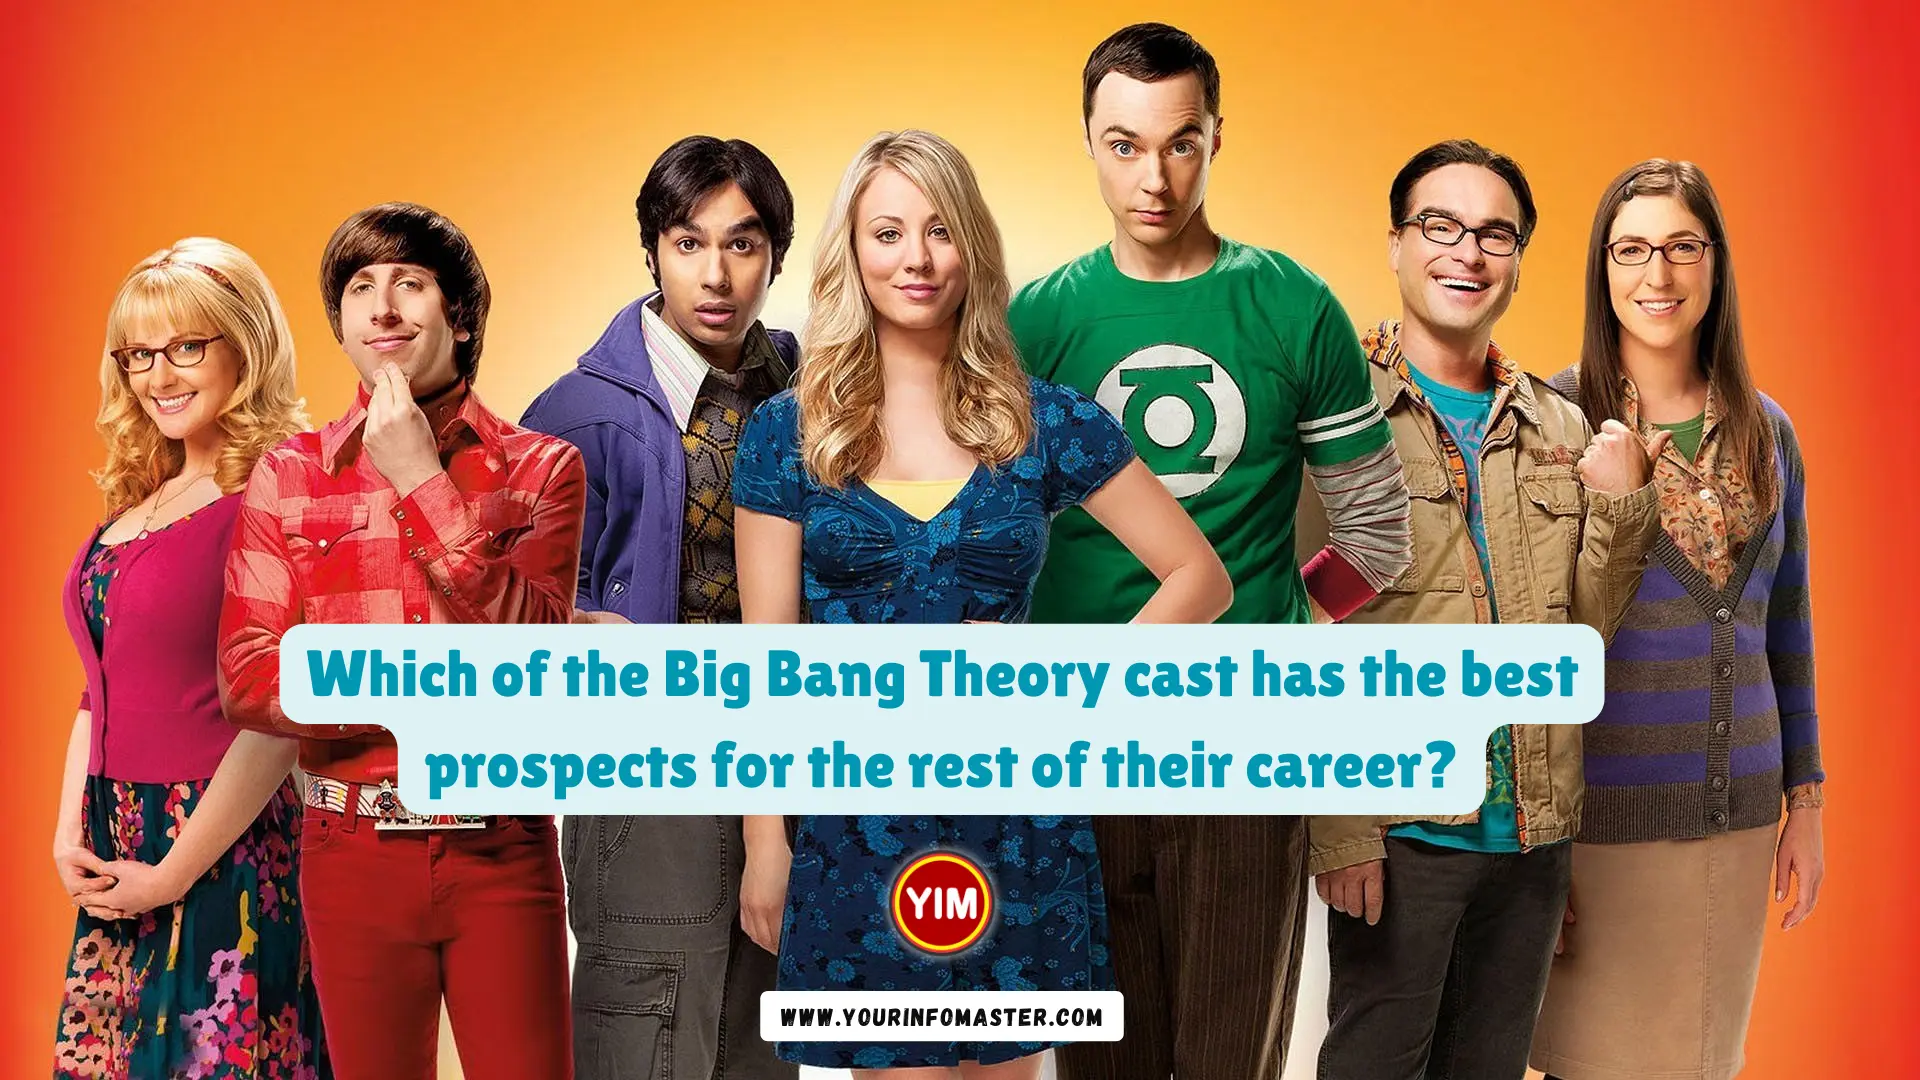 Which of the Big Bang Theory cast has the best prospects for the rest of their career